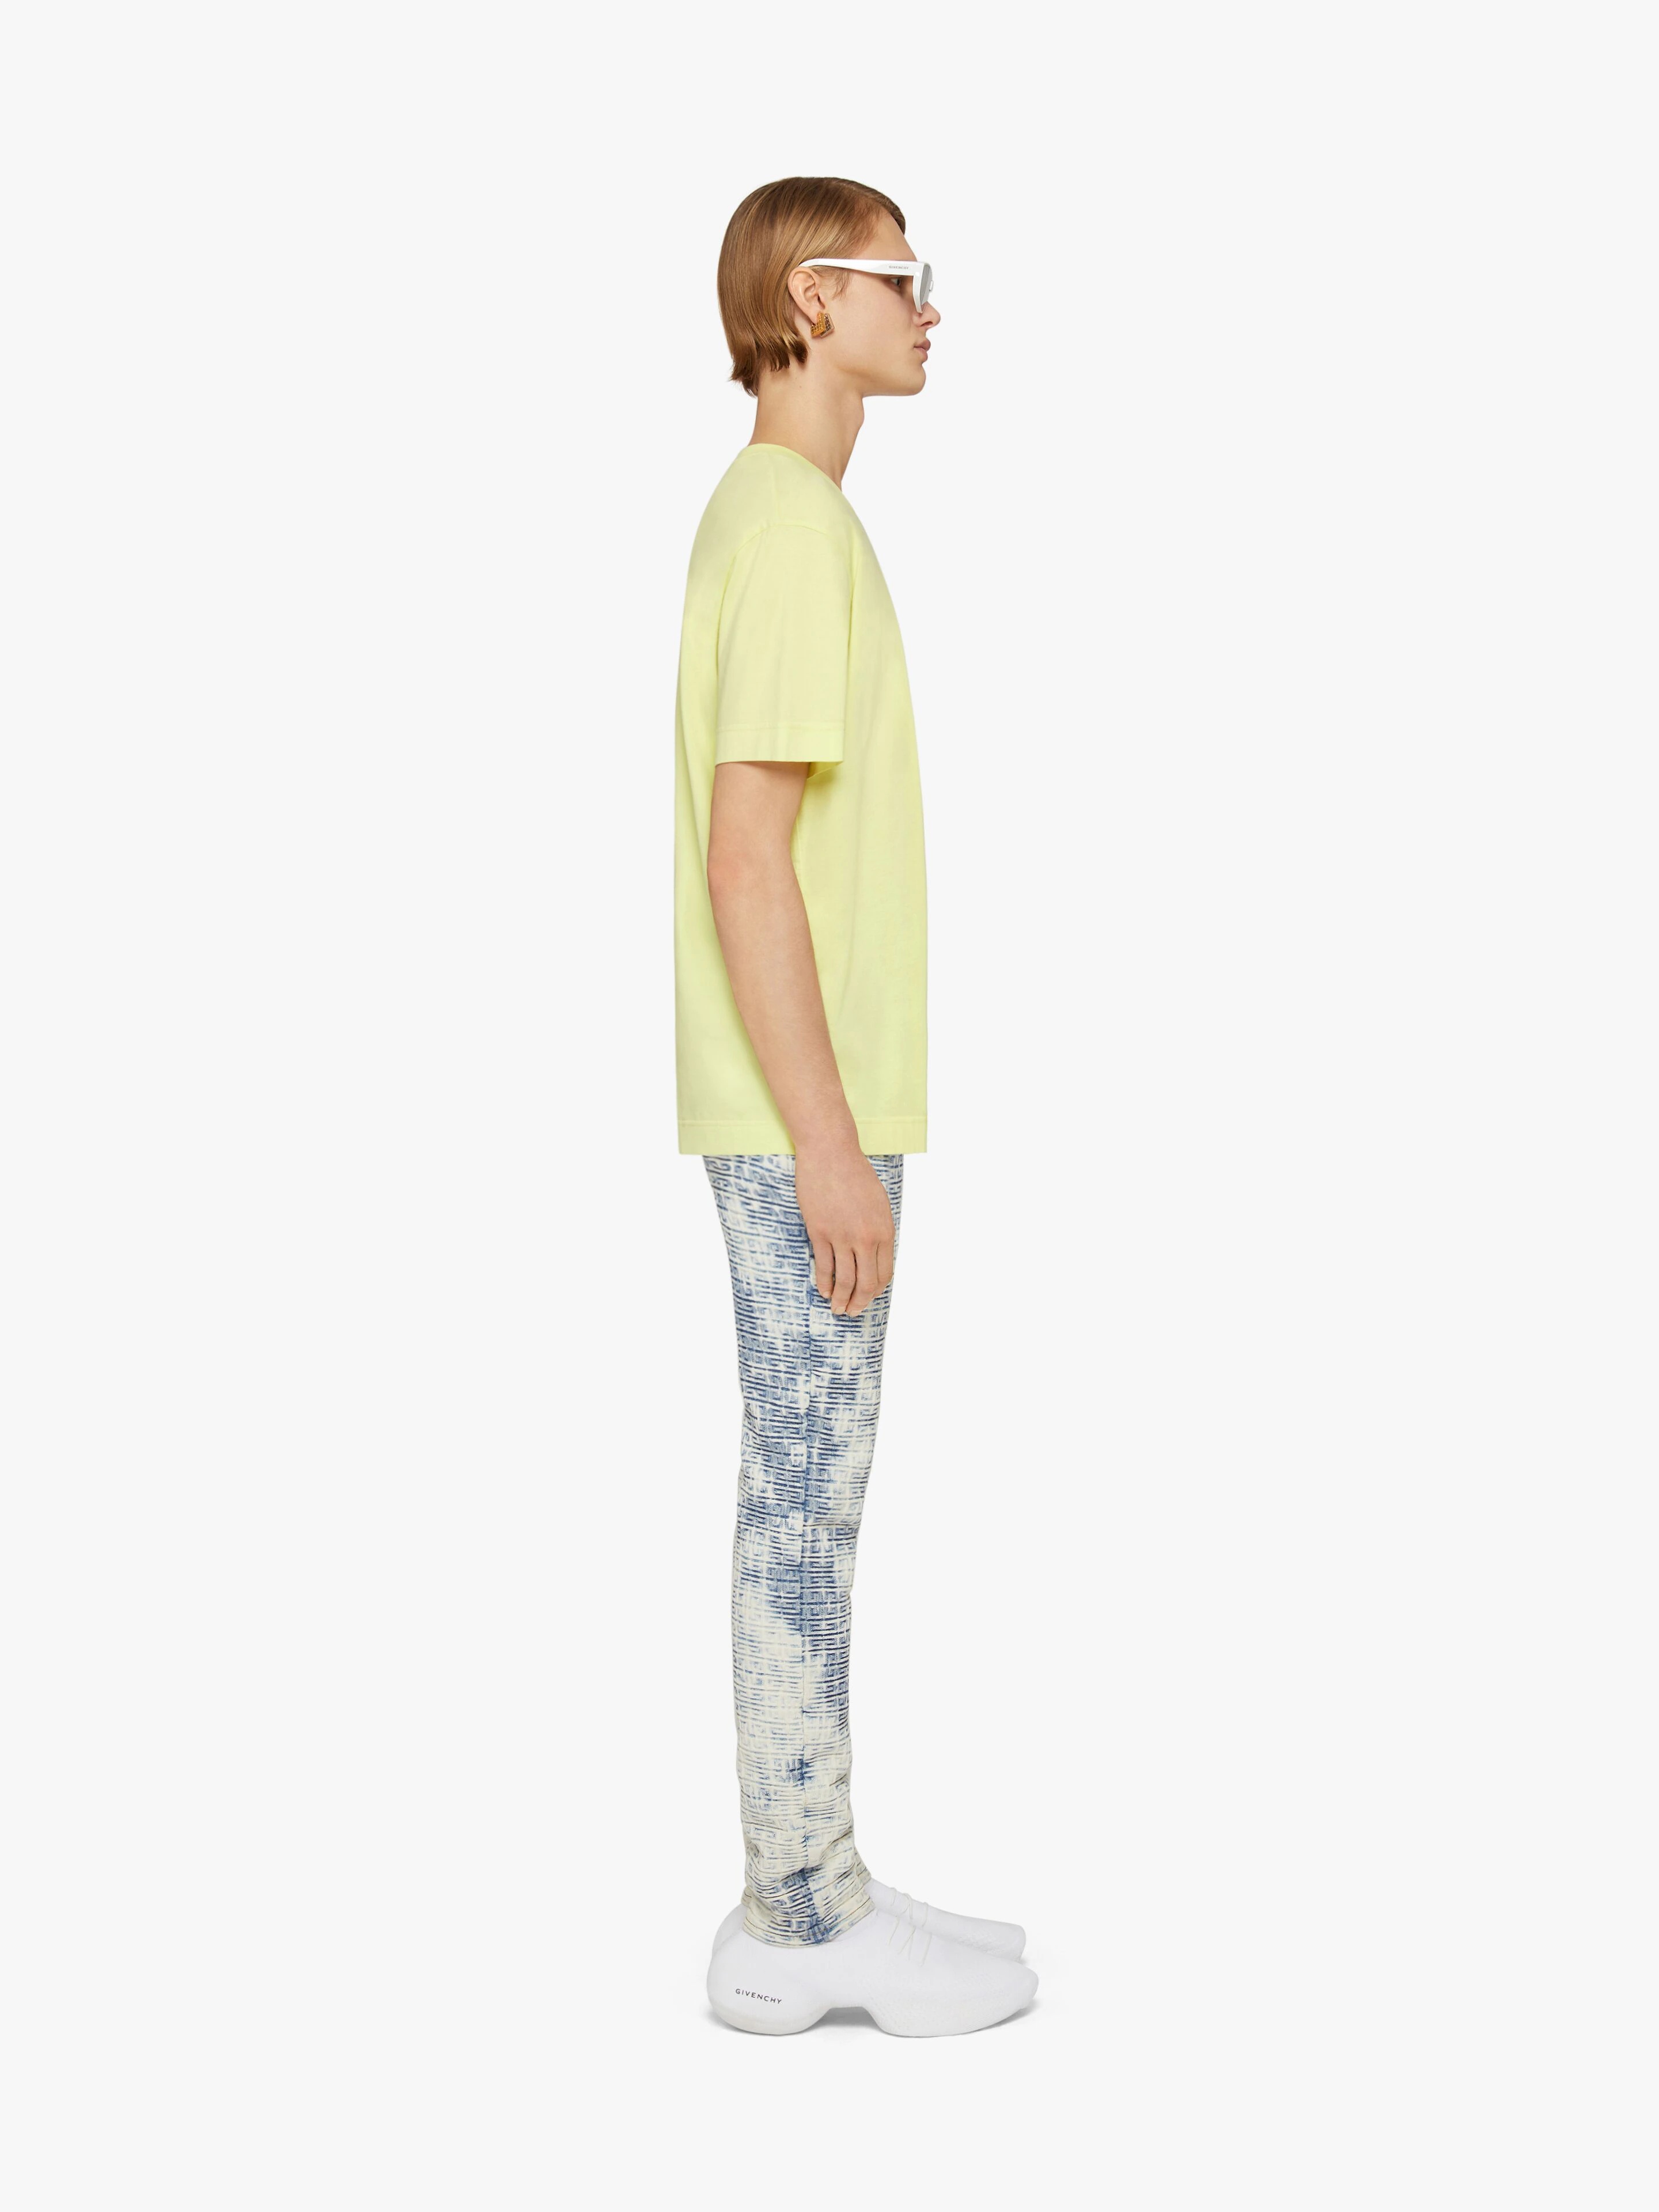 SKINNY JEANS IN 4G BLEACHED DENIM WITH ZIPPERS - 3